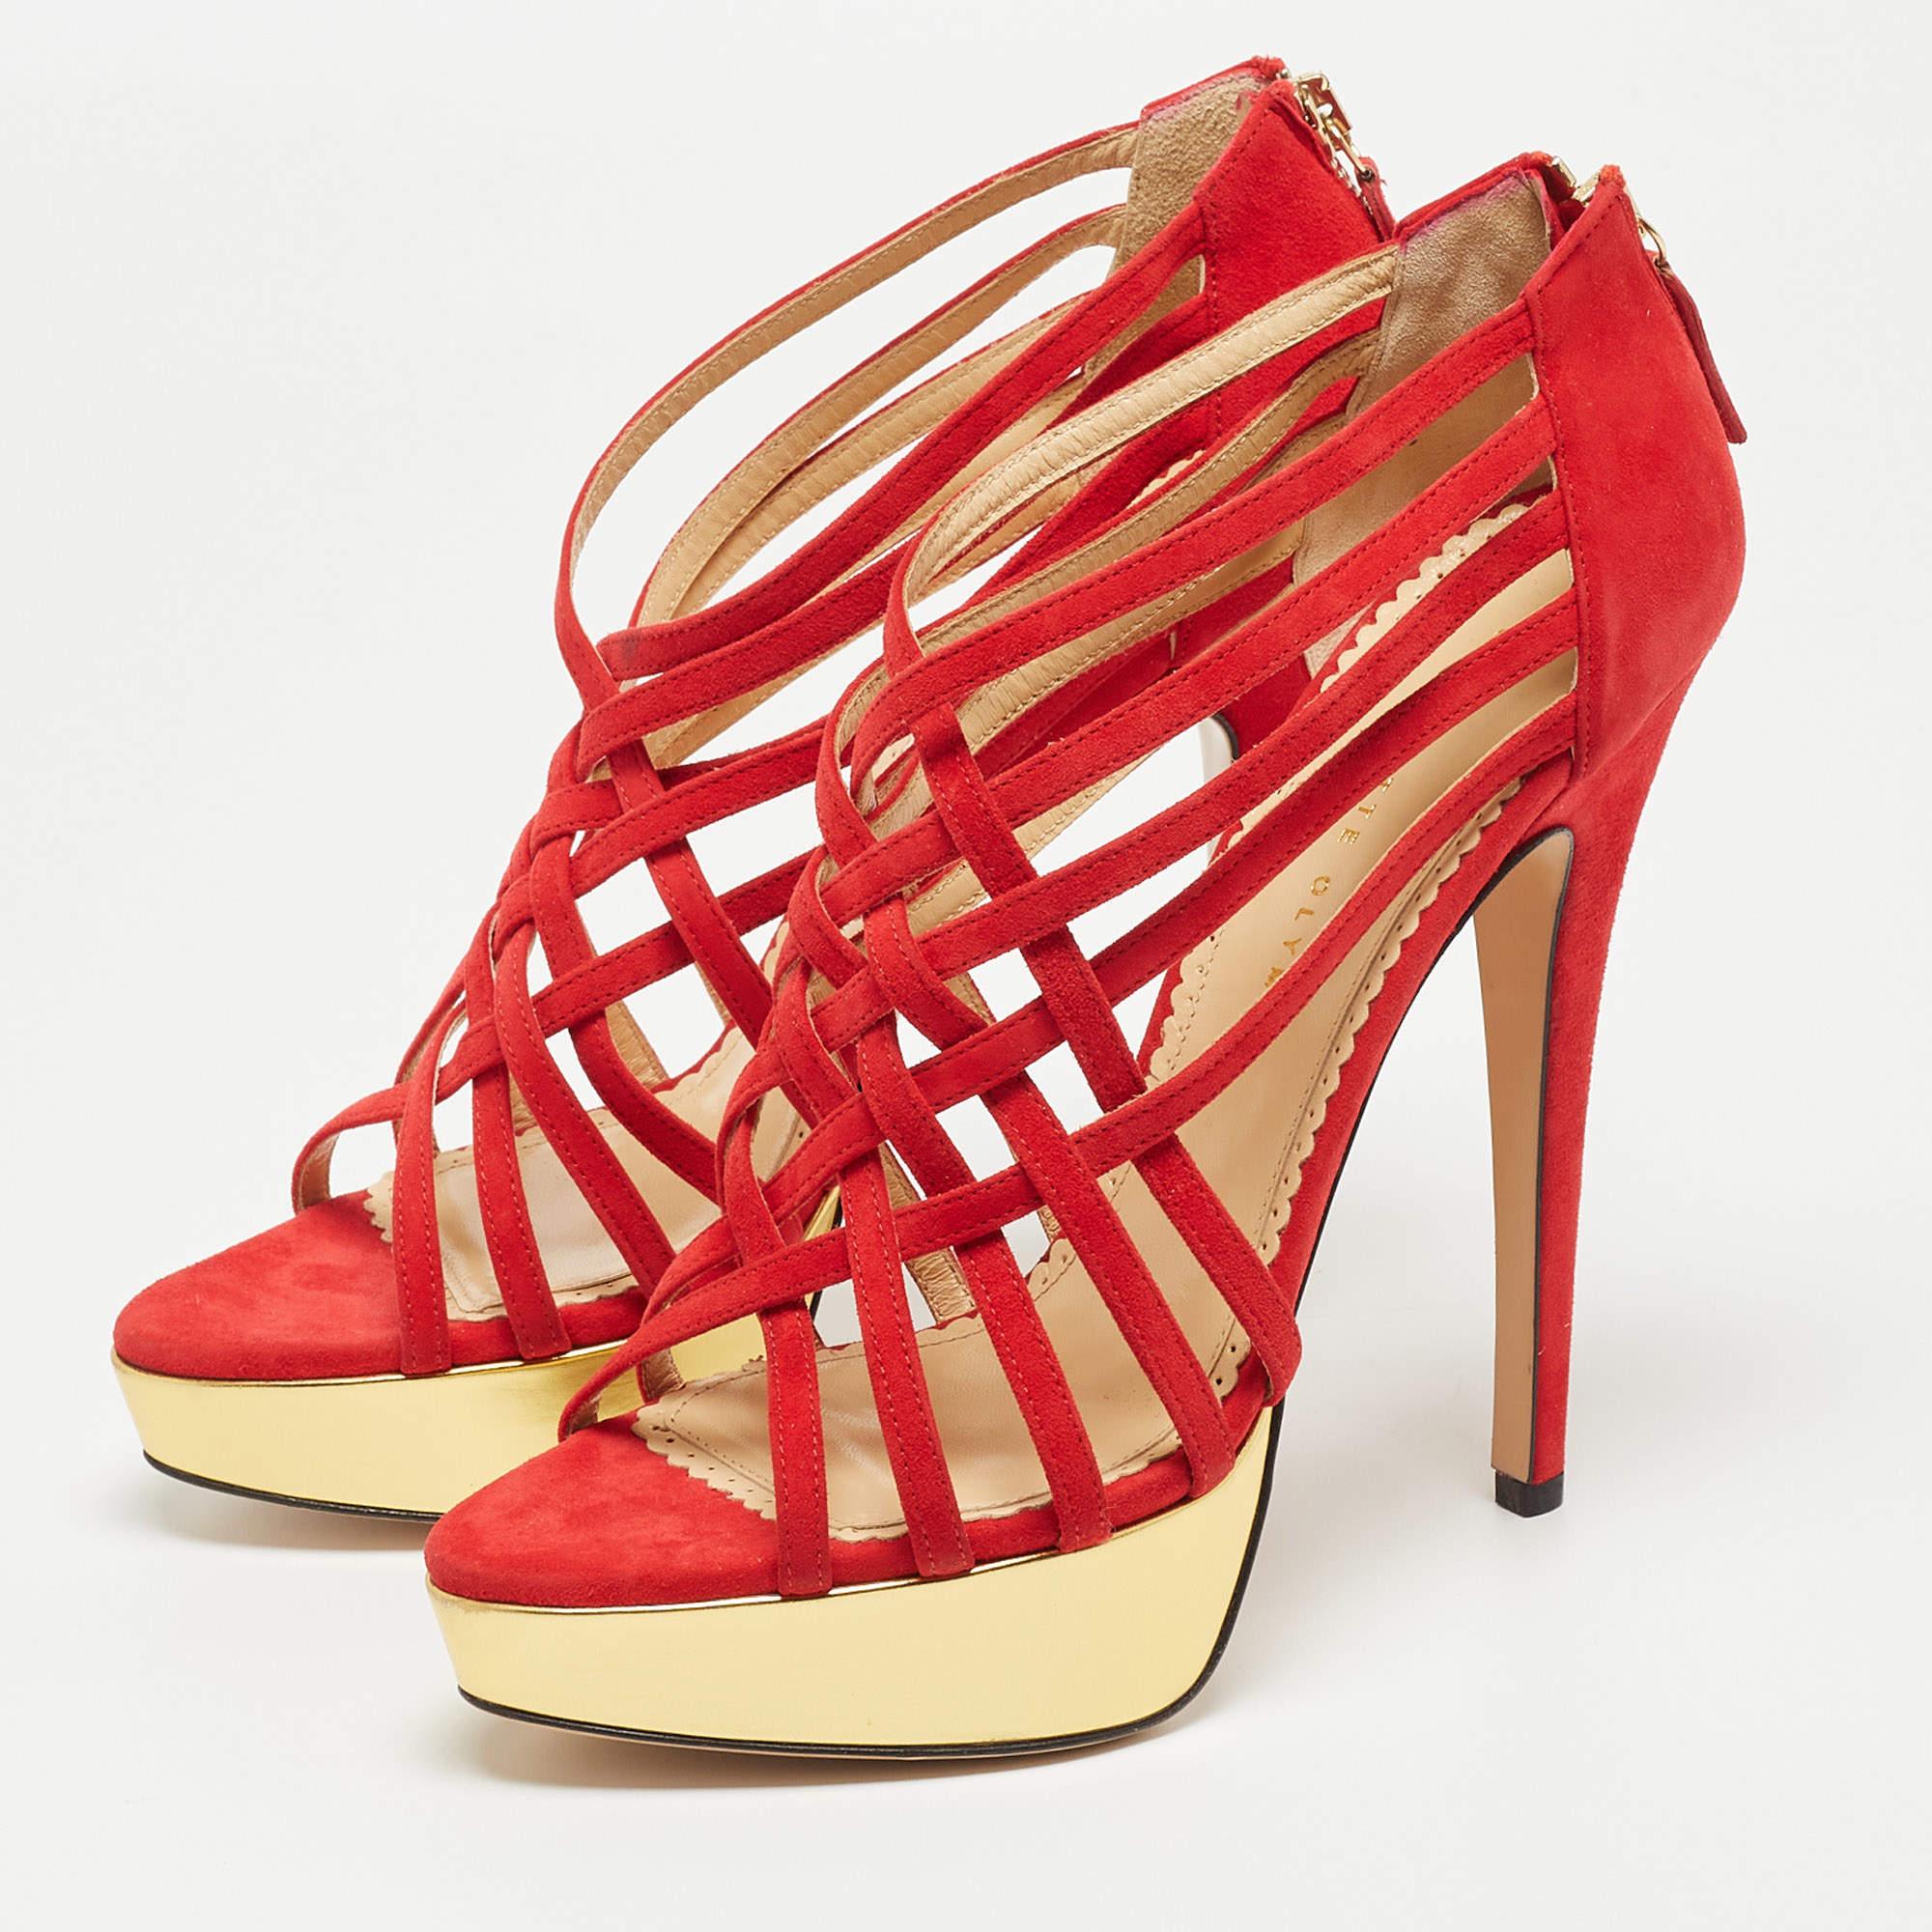 Charlotte Olympia Red Suede Strappy Platform Sandals Size 40 7